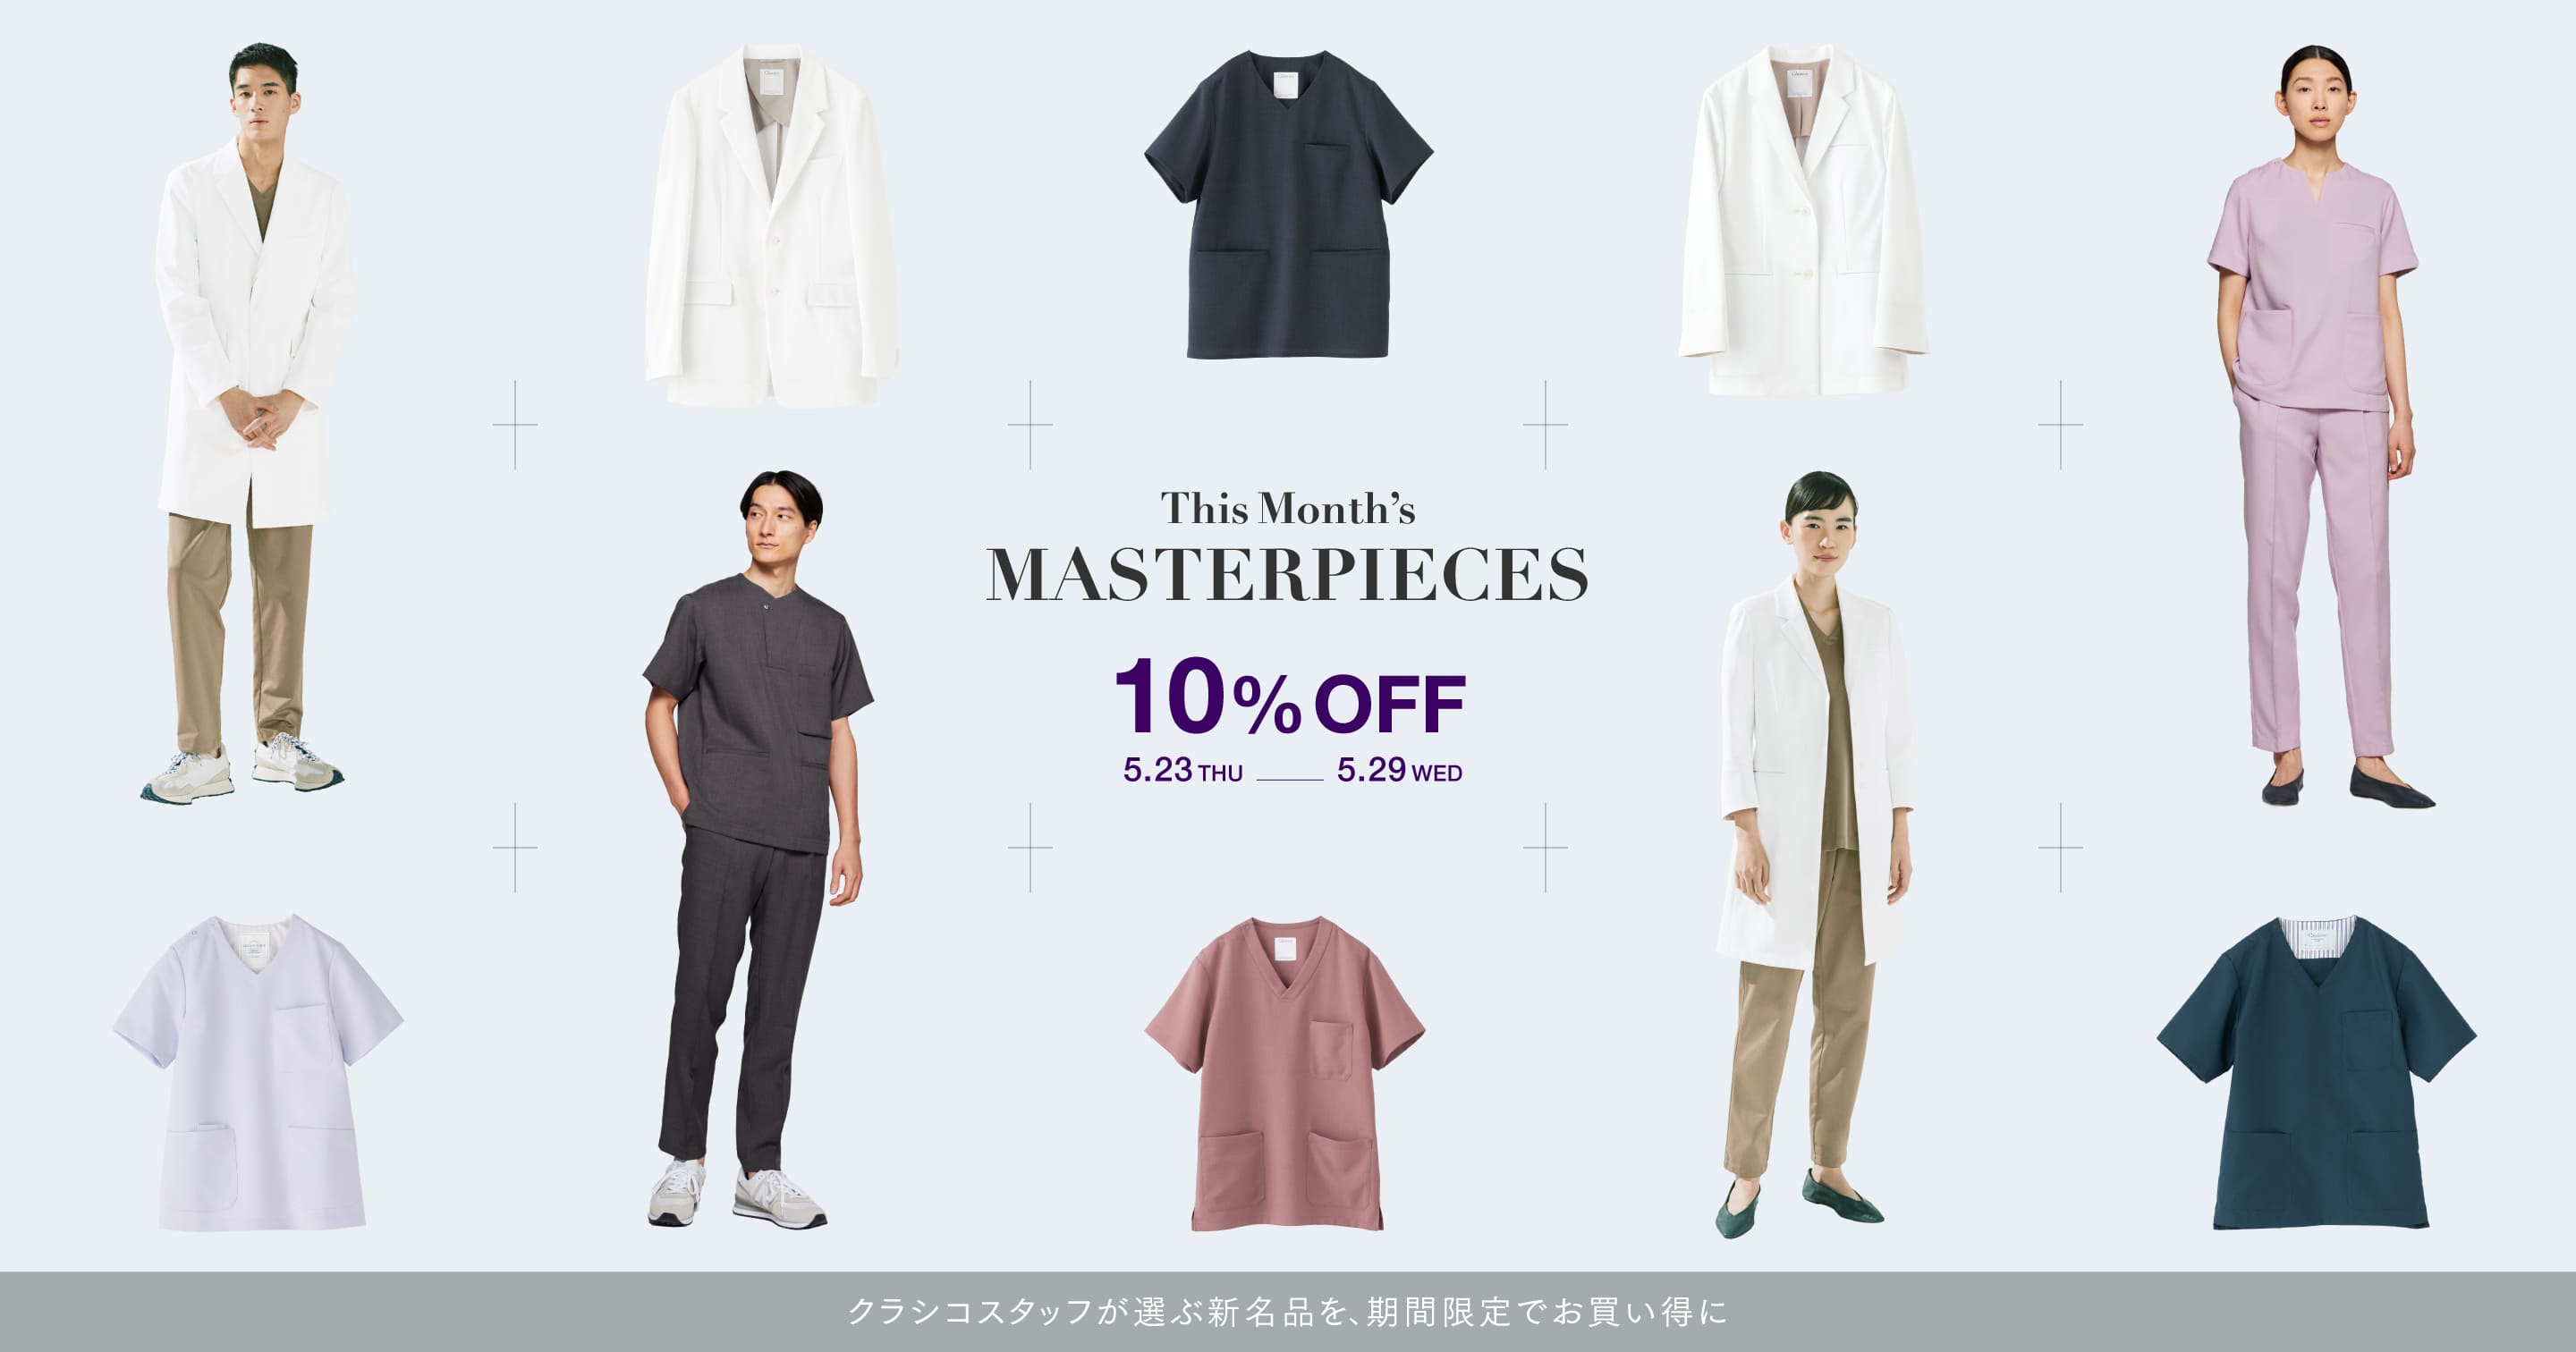 This Month's MASTERPIECES 10% OFF